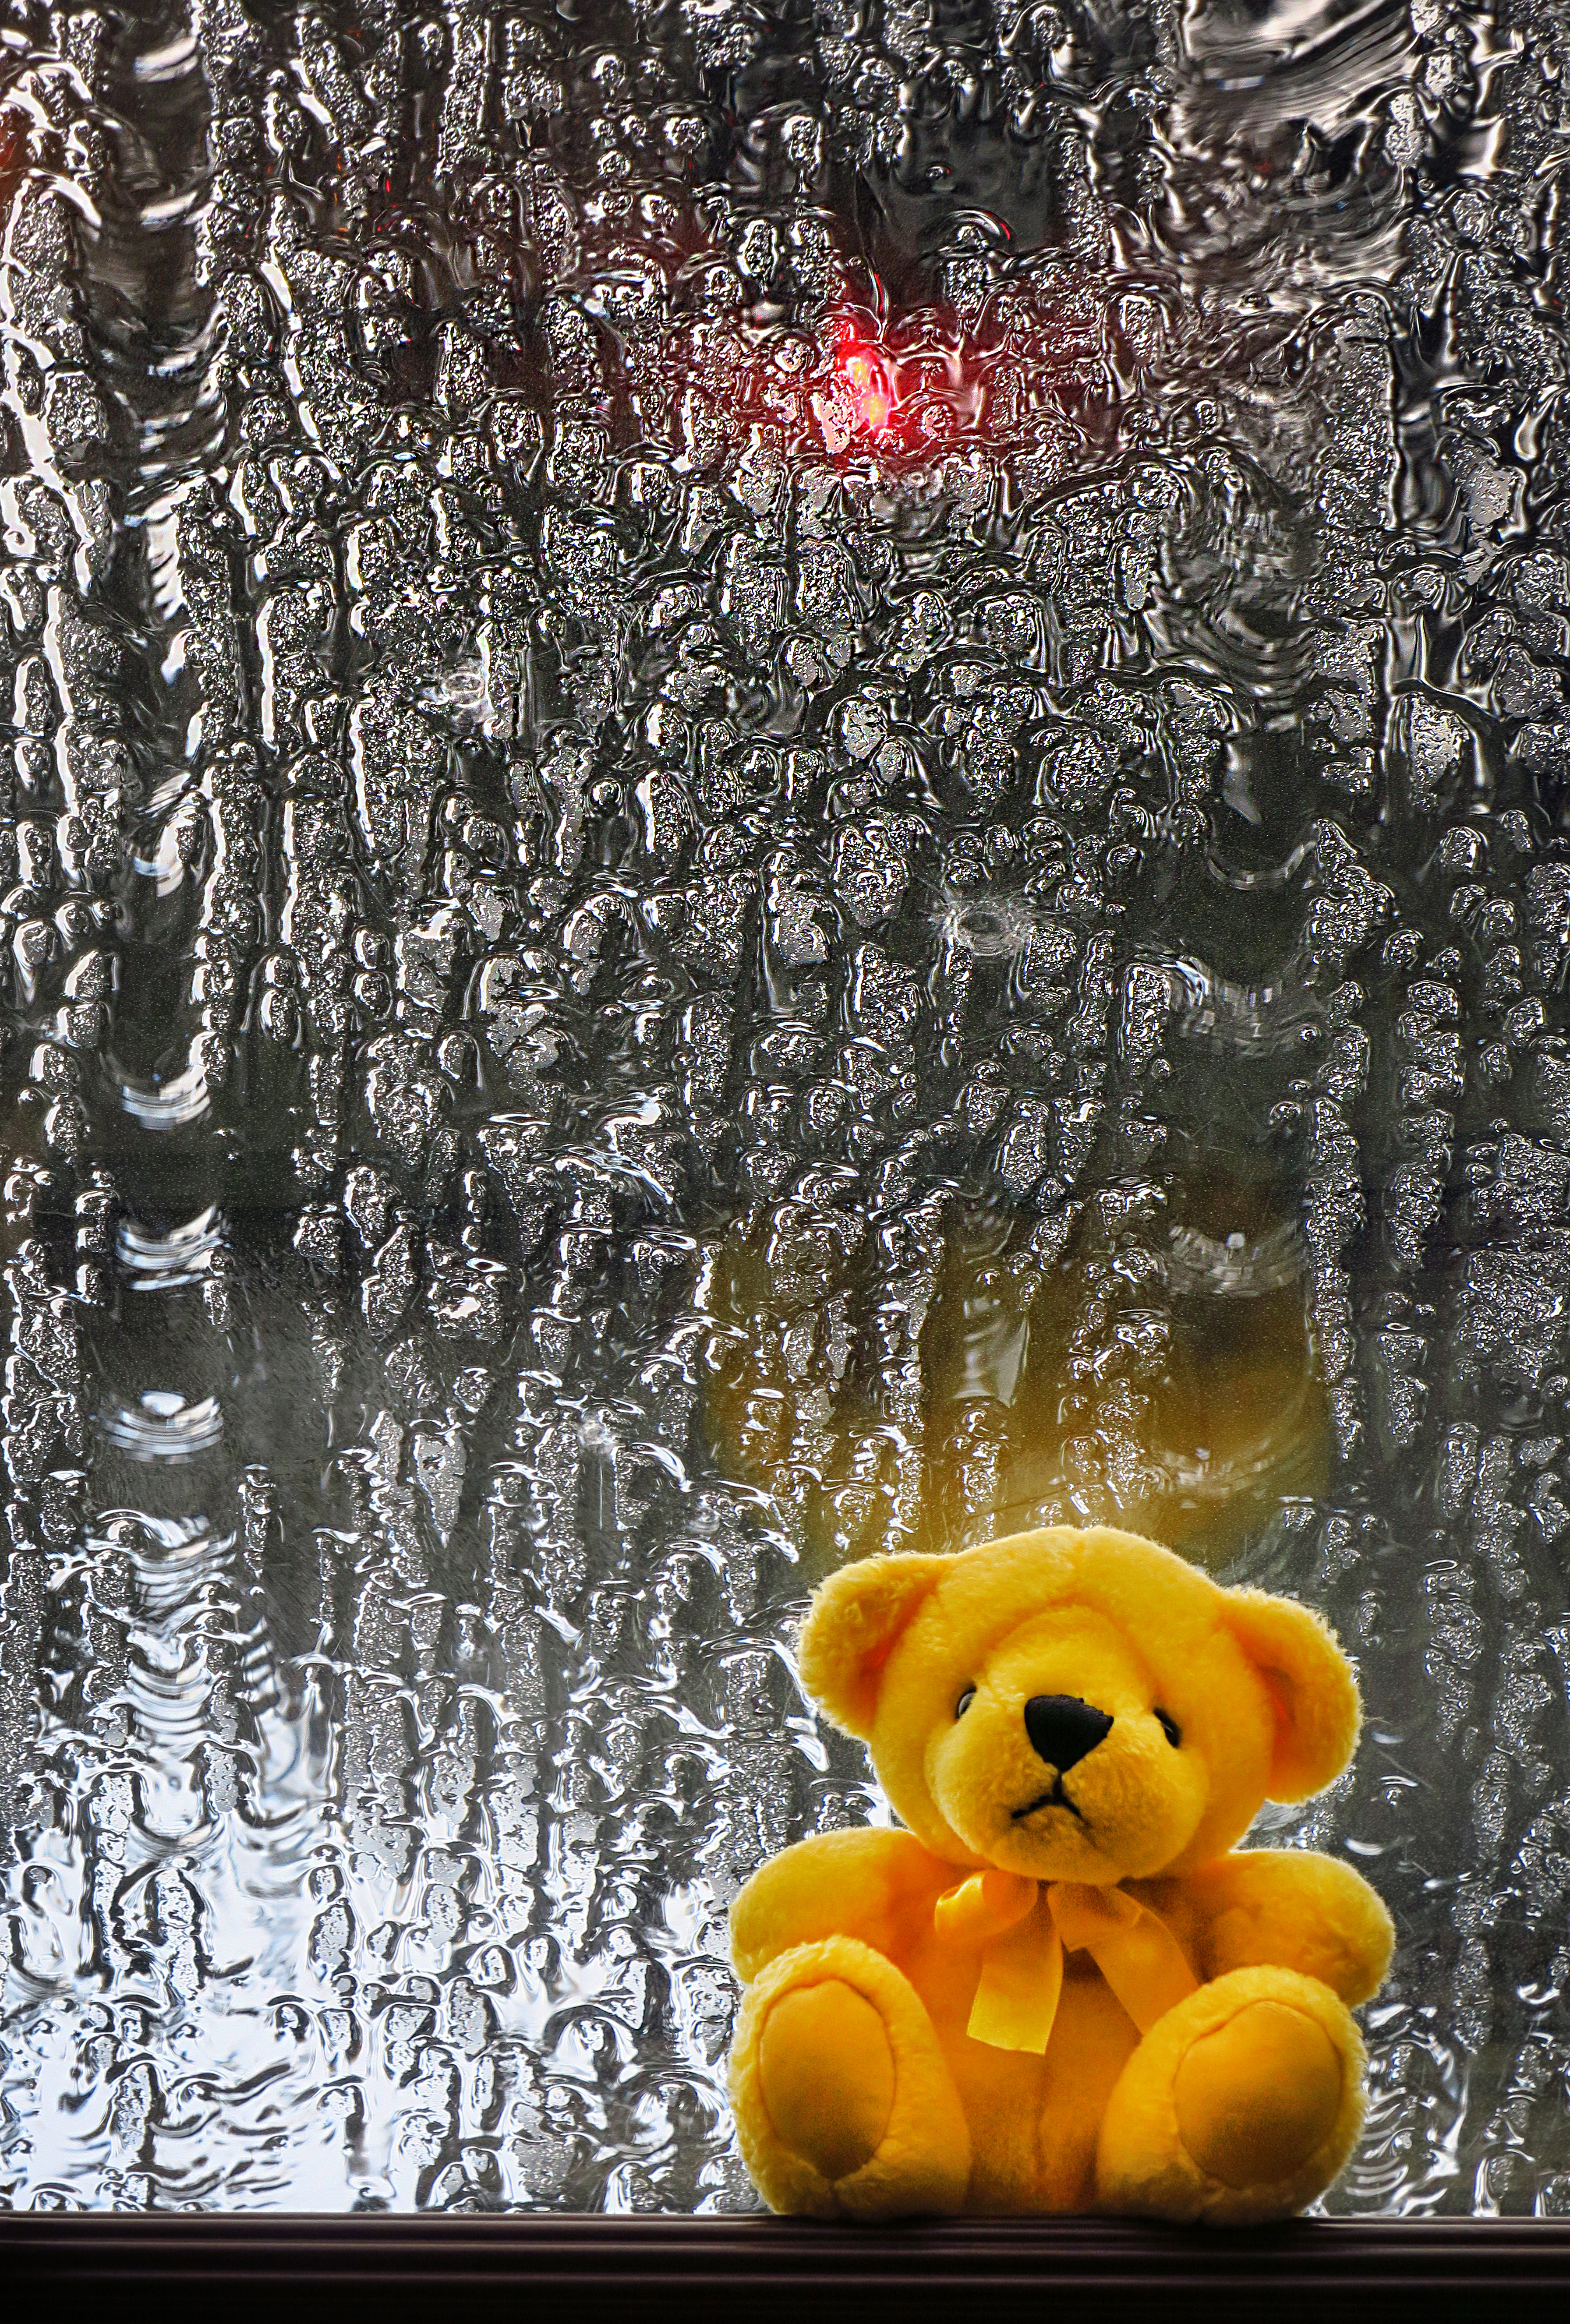 77484 download wallpaper teddy bear, miscellanea, miscellaneous, wet, plush, toy, window, bear cub screensavers and pictures for free